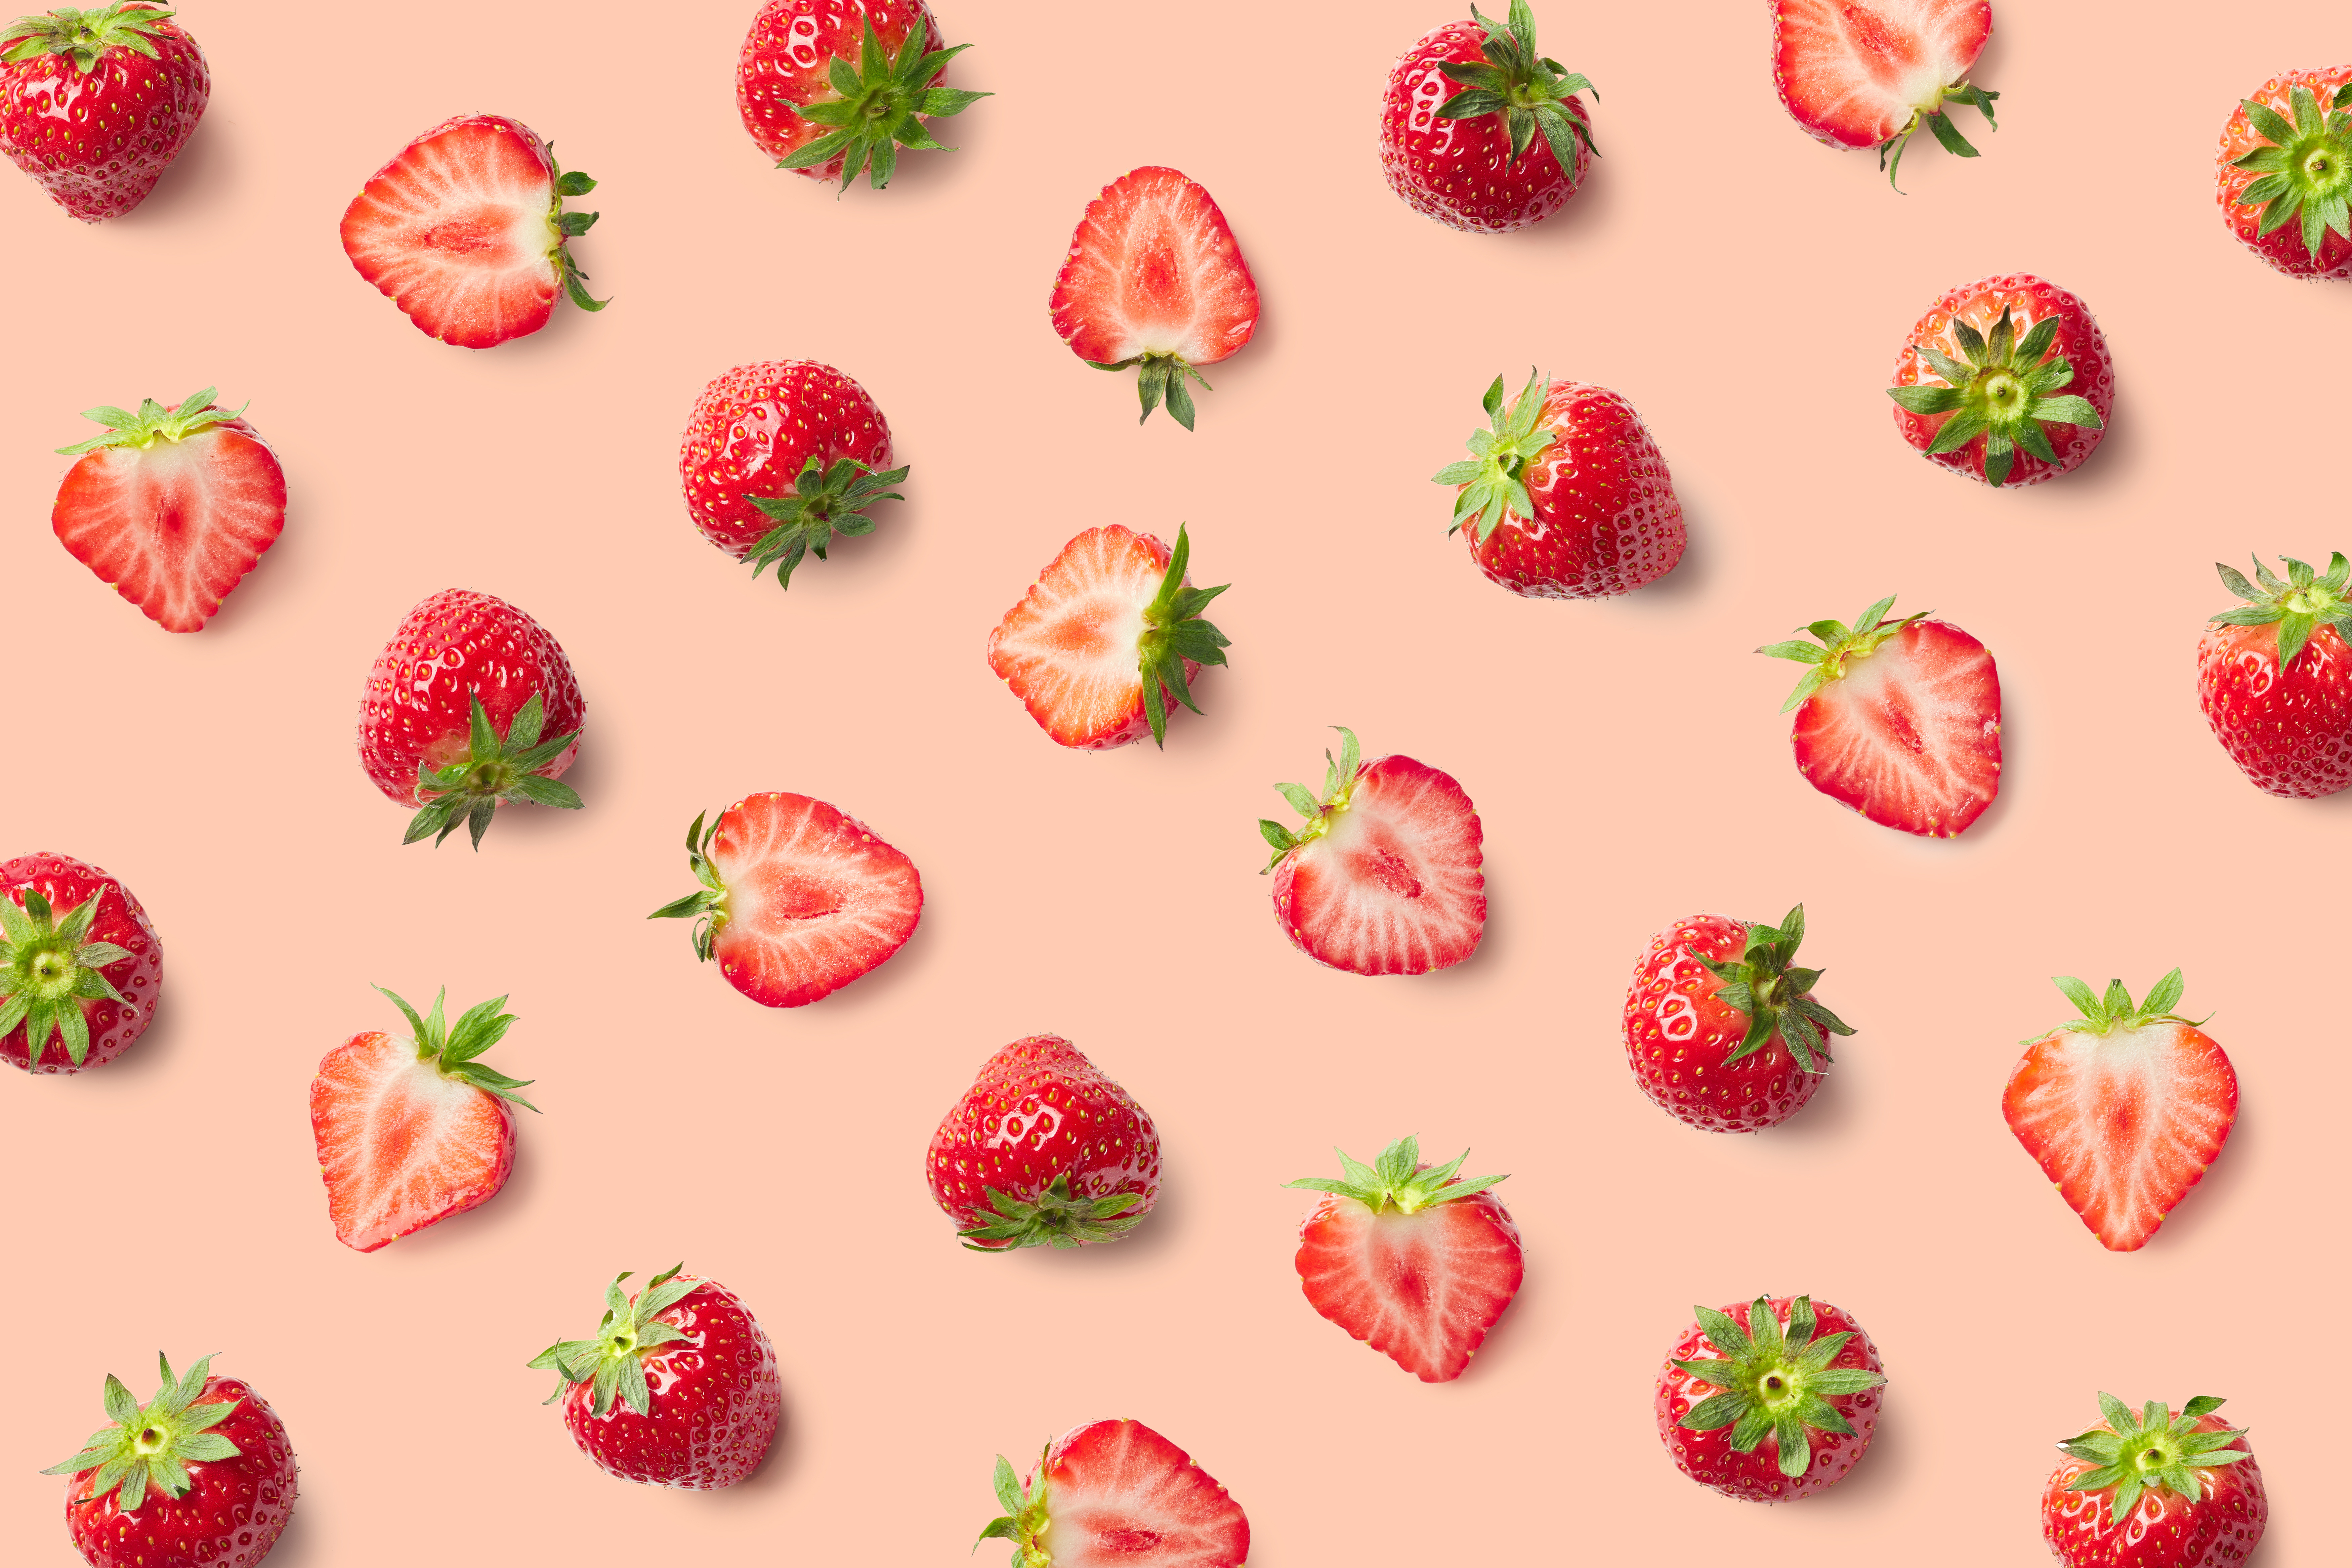 Strawberries for the MIND diet